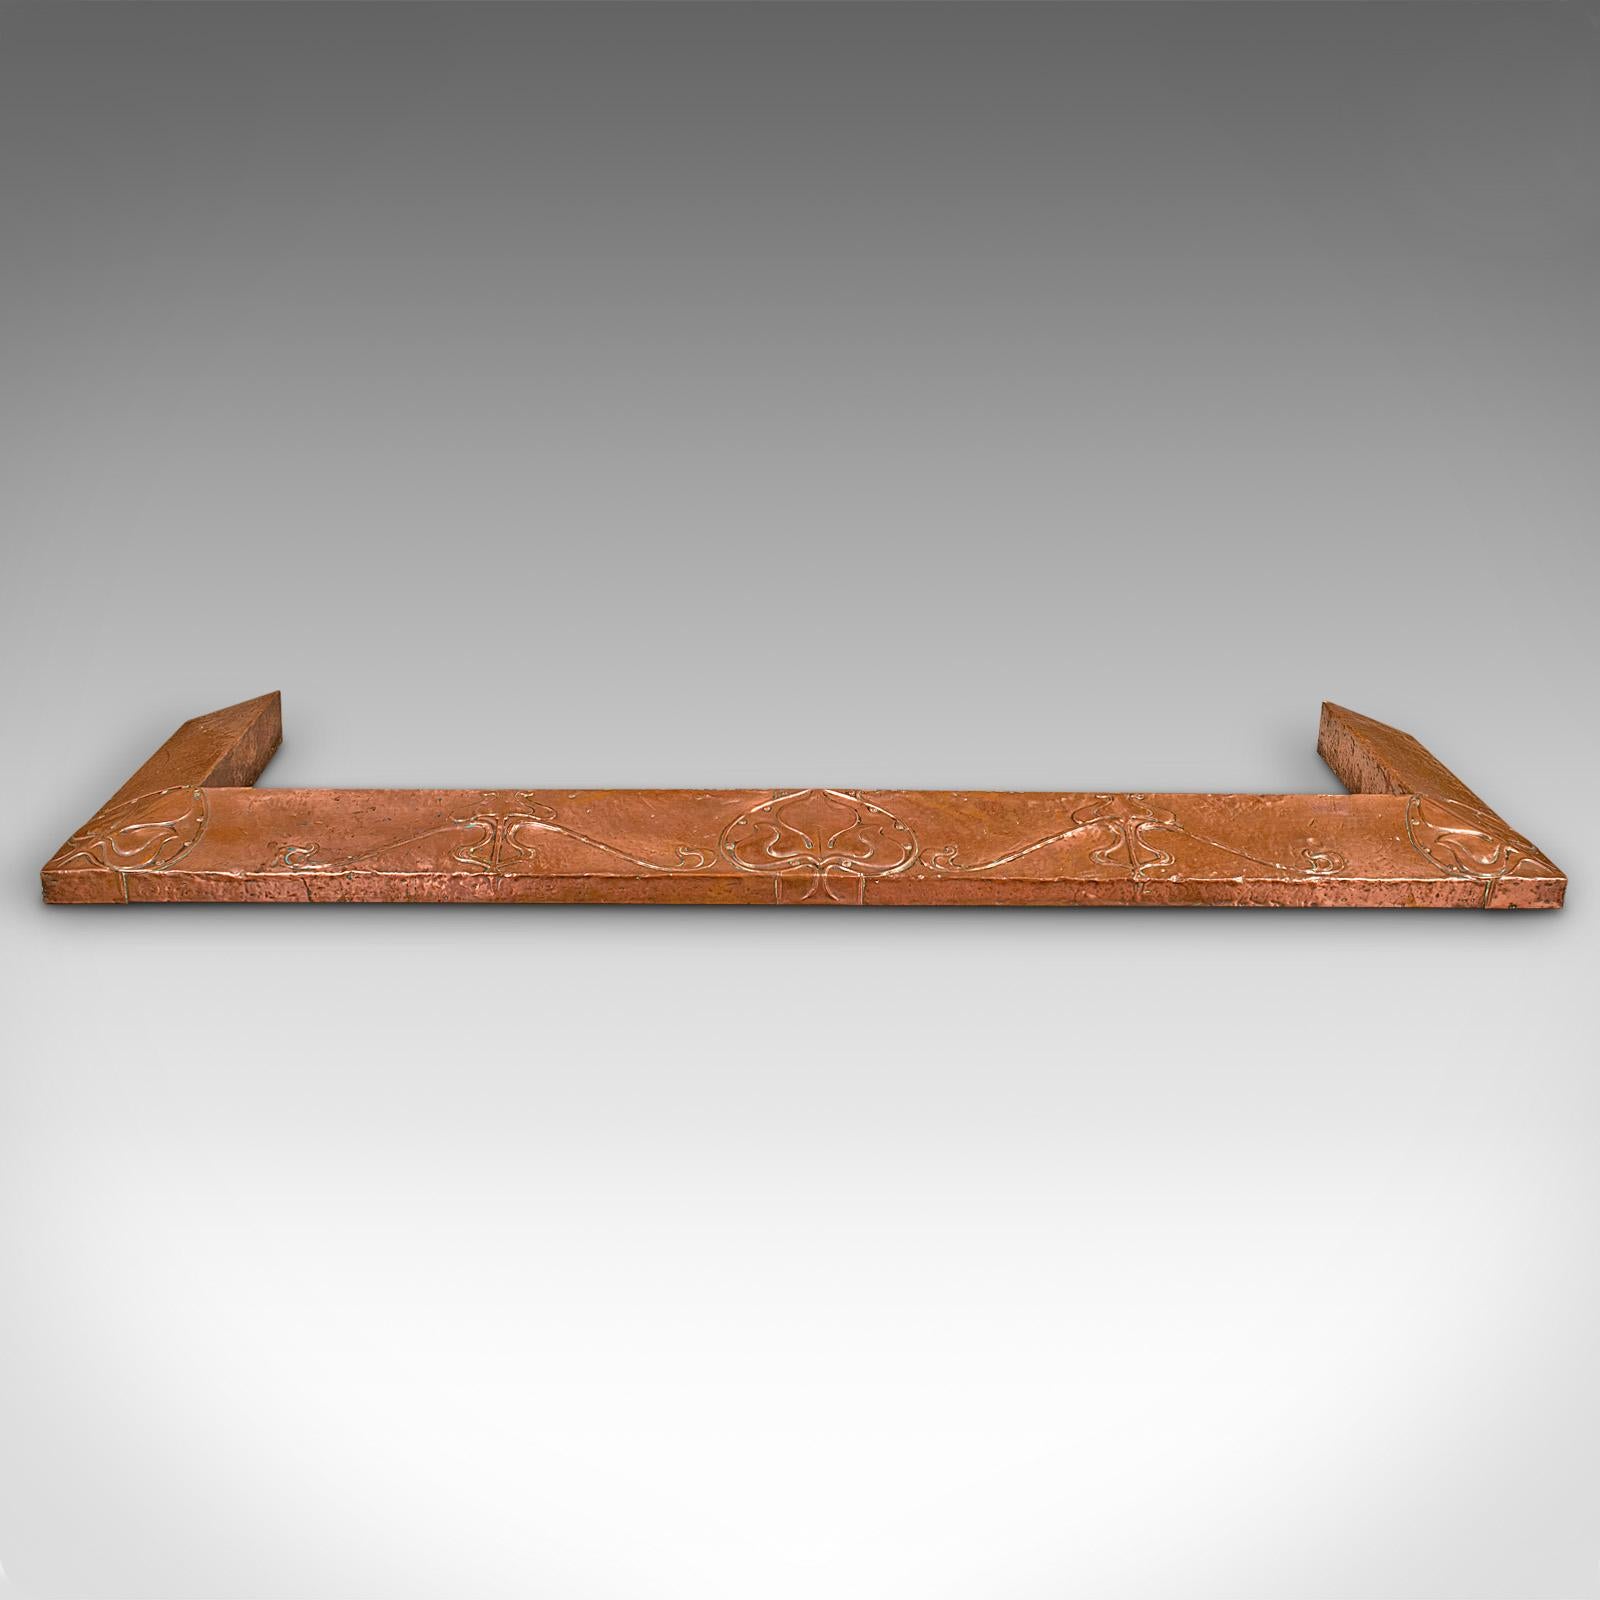 This is an antique decorative fire kerb. An English, copper fireside hearth surround in Art Nouveau taste, dating to the late Victorian period, circa 1900.

Accentuate your grand fireplace with this dashing fire kerb
Displays a desirable aged patina